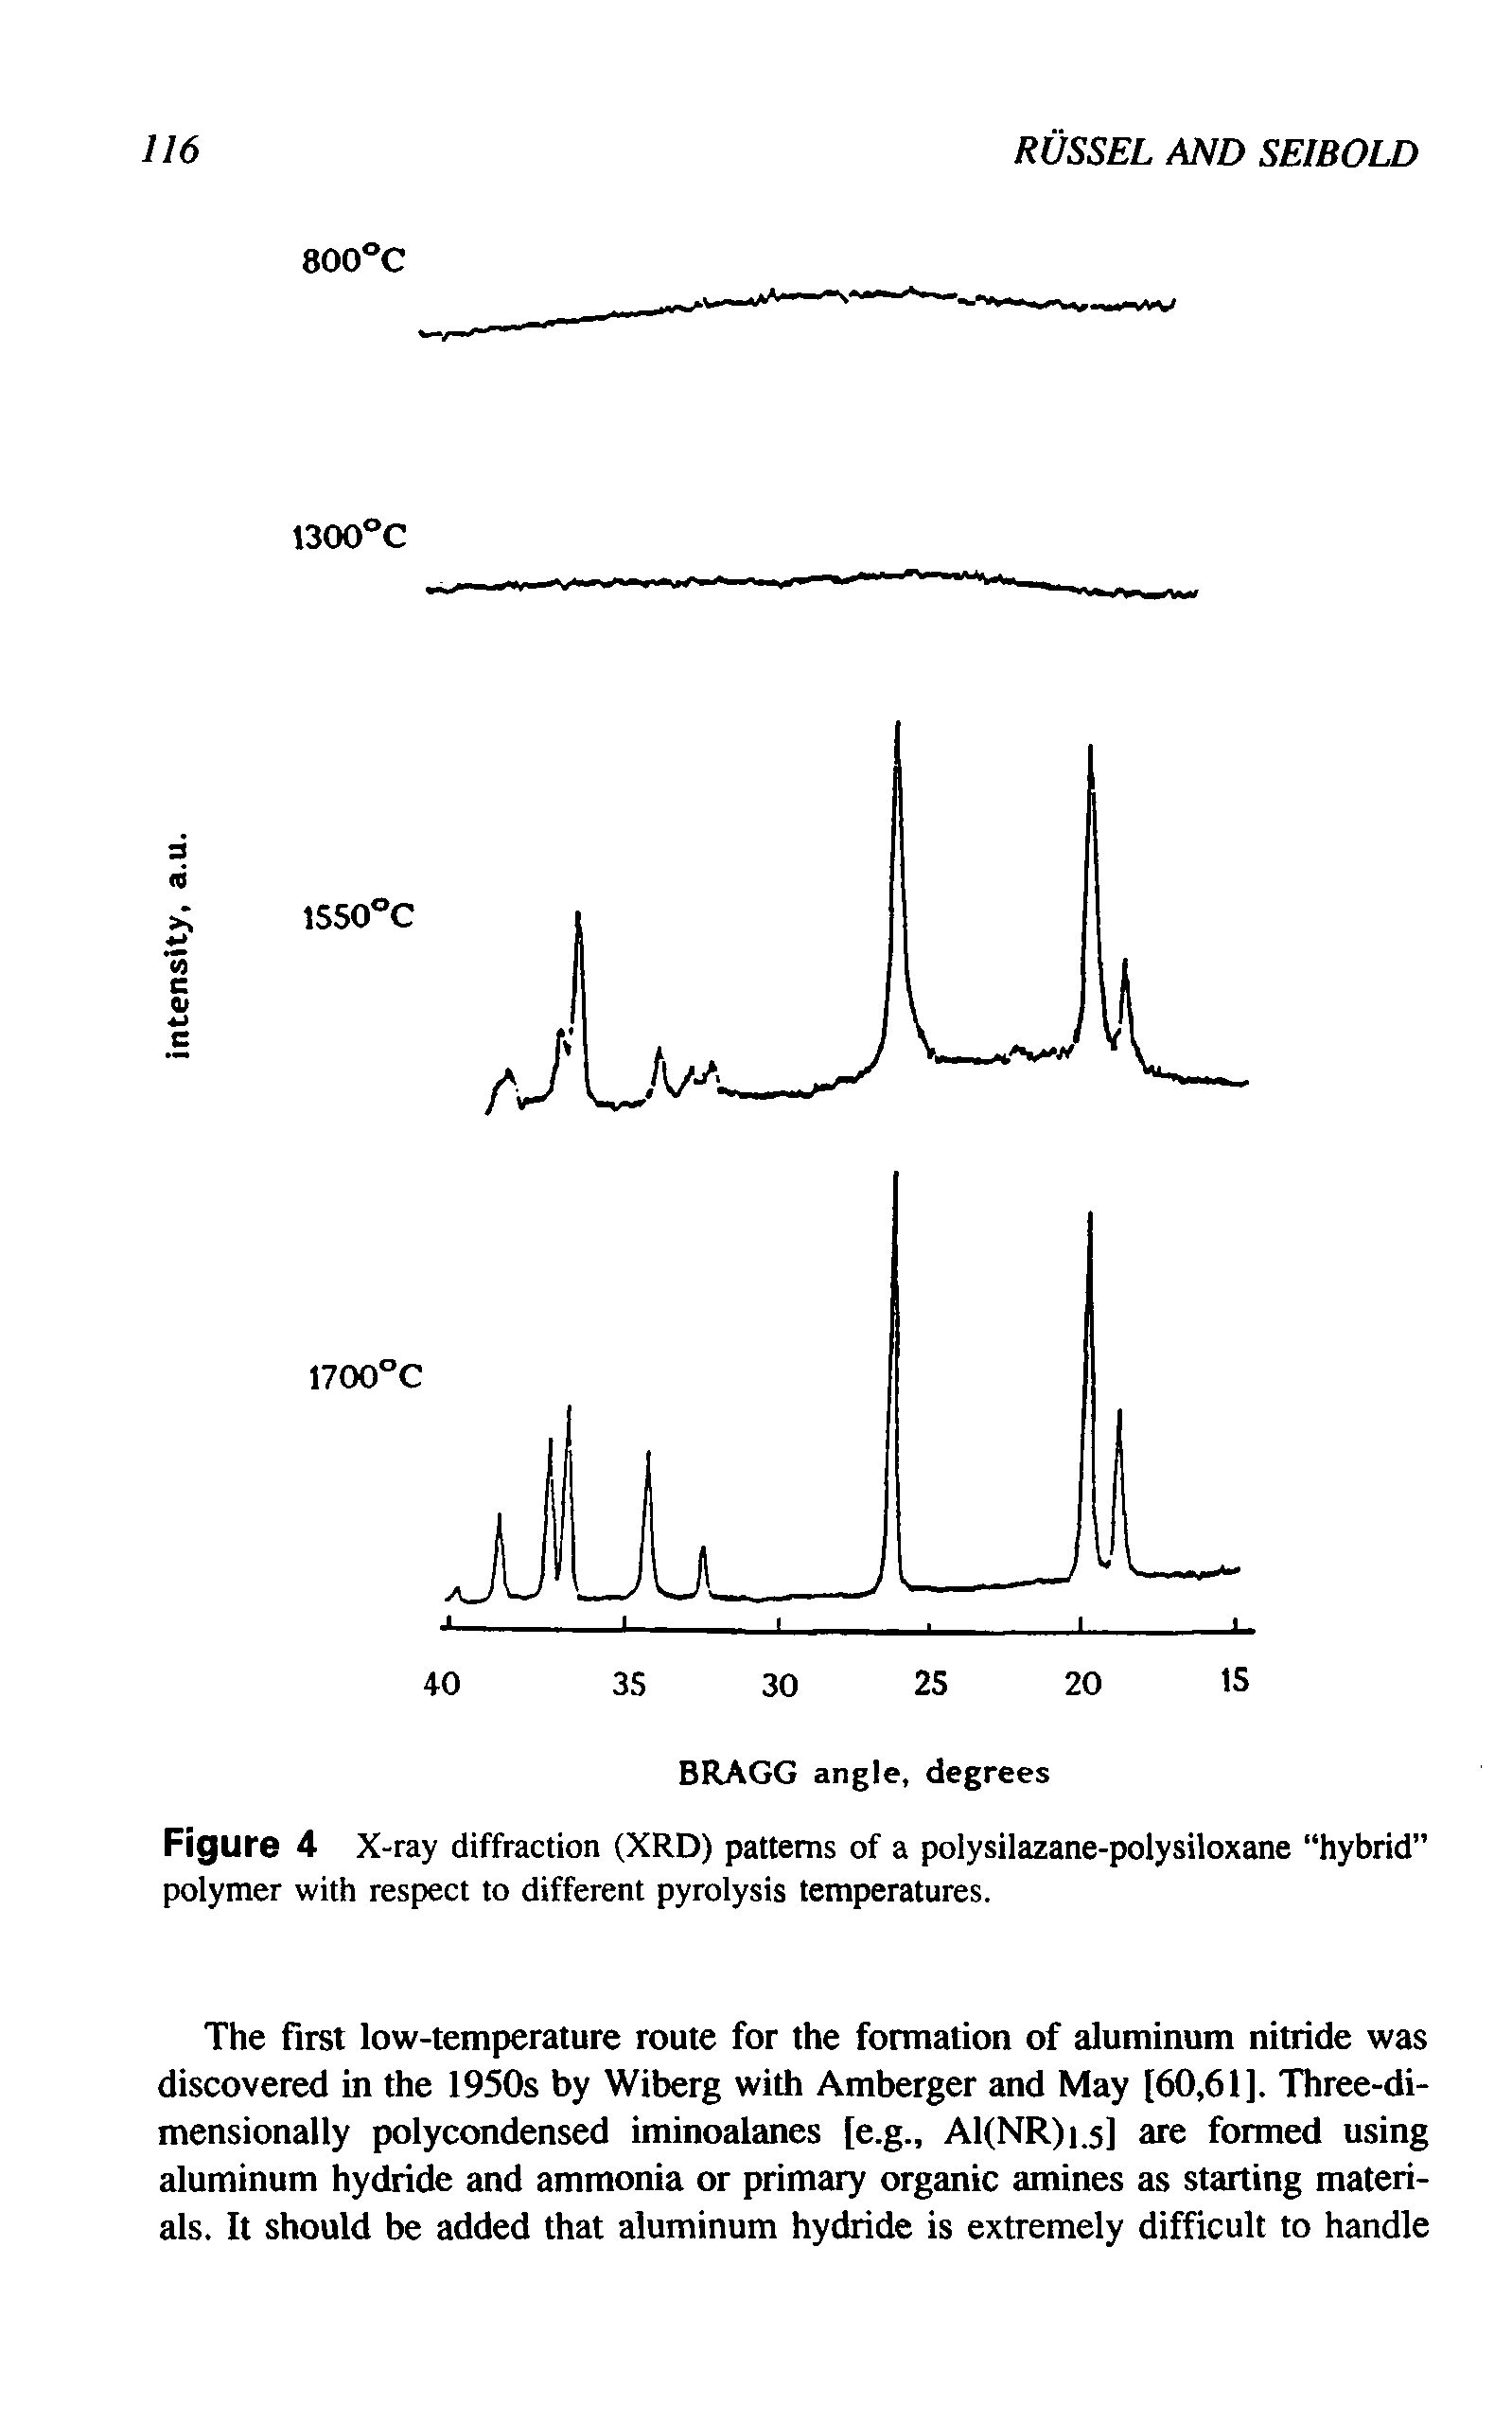 Figure 4 X-ray diffraction (XRD) patterns of a polysilazane-polysiloxane hybrid polymer with respect to different pyrolysis temperatures.